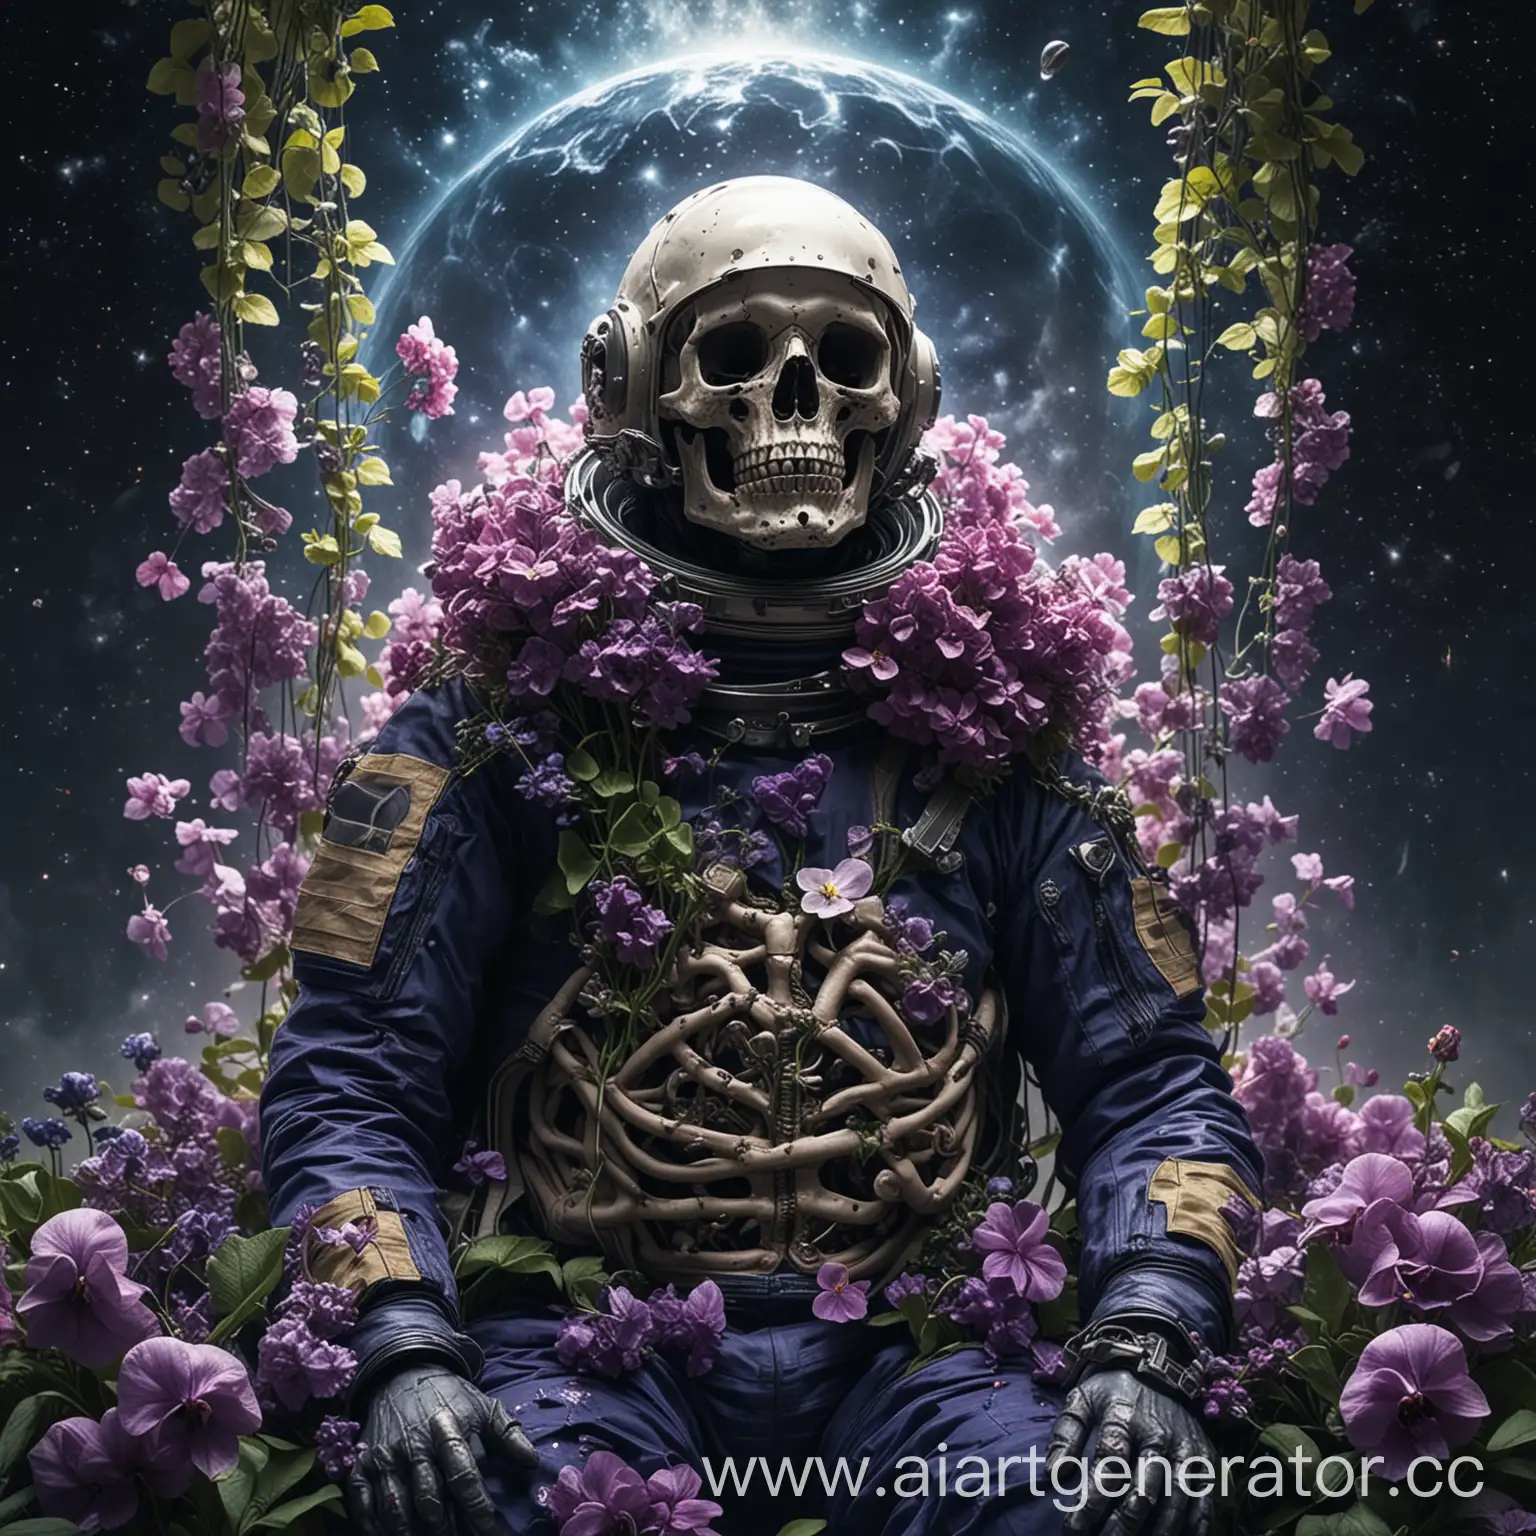 Astronaut-with-Skull-Helmet-Swinging-in-Space-with-Violets